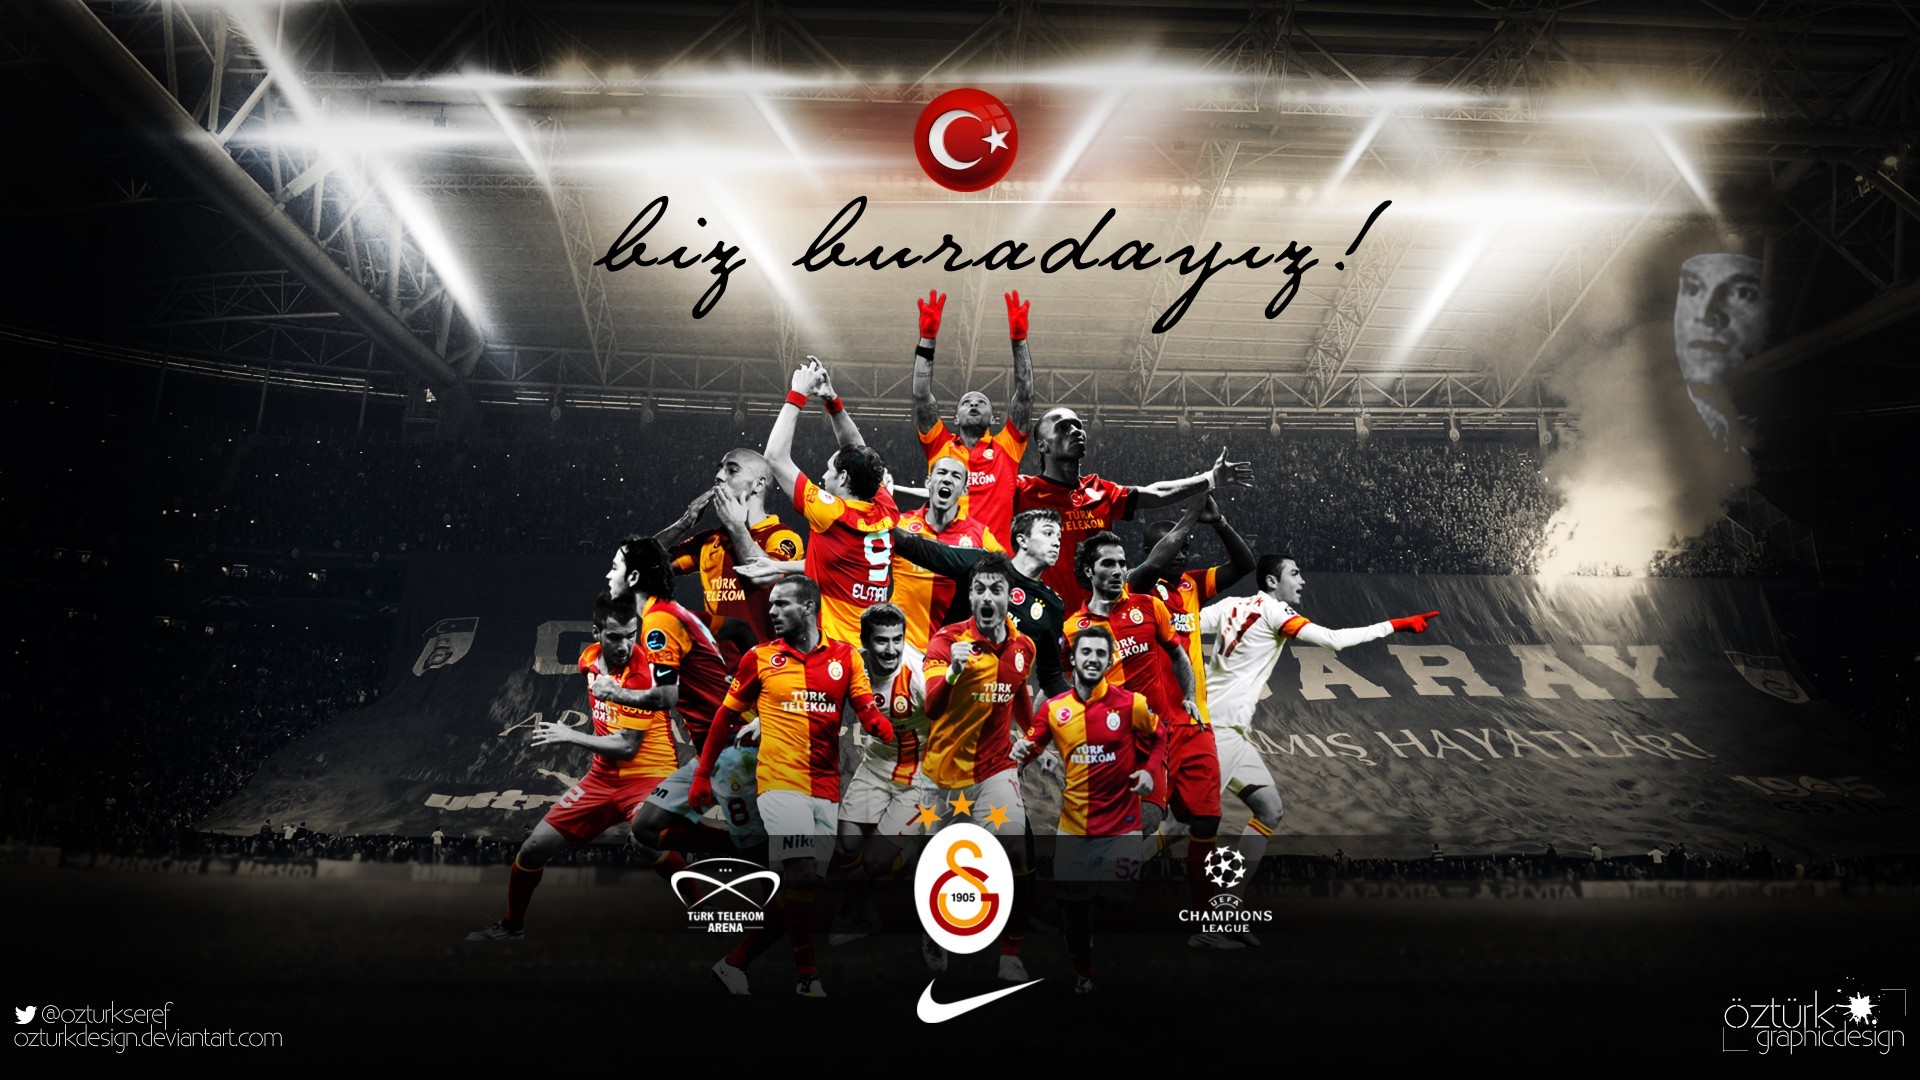 galatasaray hd wallpaper,team,font,poster,graphics,graphic design